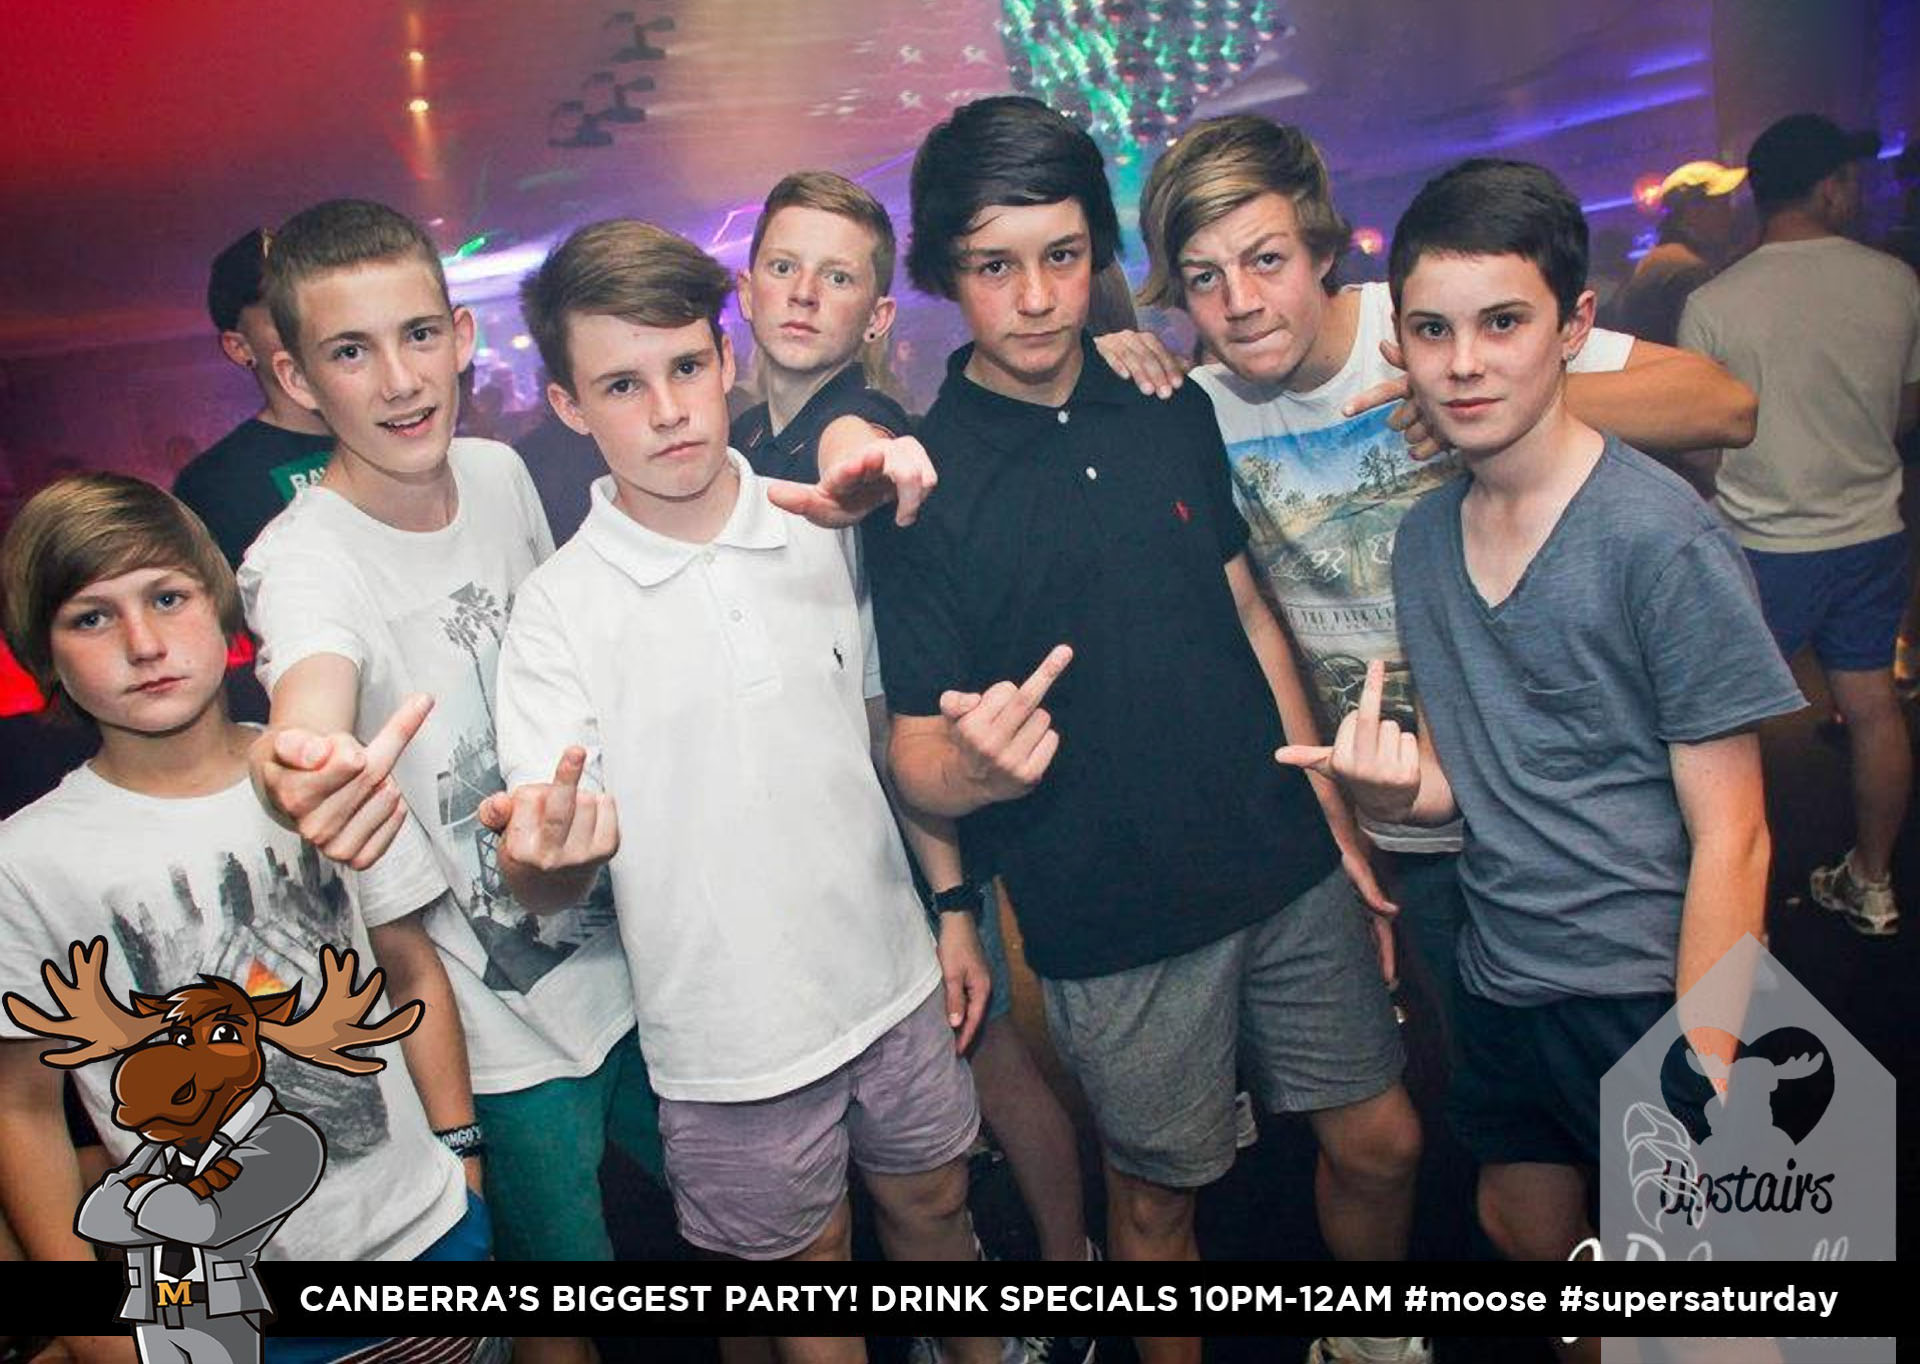 Pre-Teens Trying To Look Tough & Cool In A Nightclub Blank Meme Template